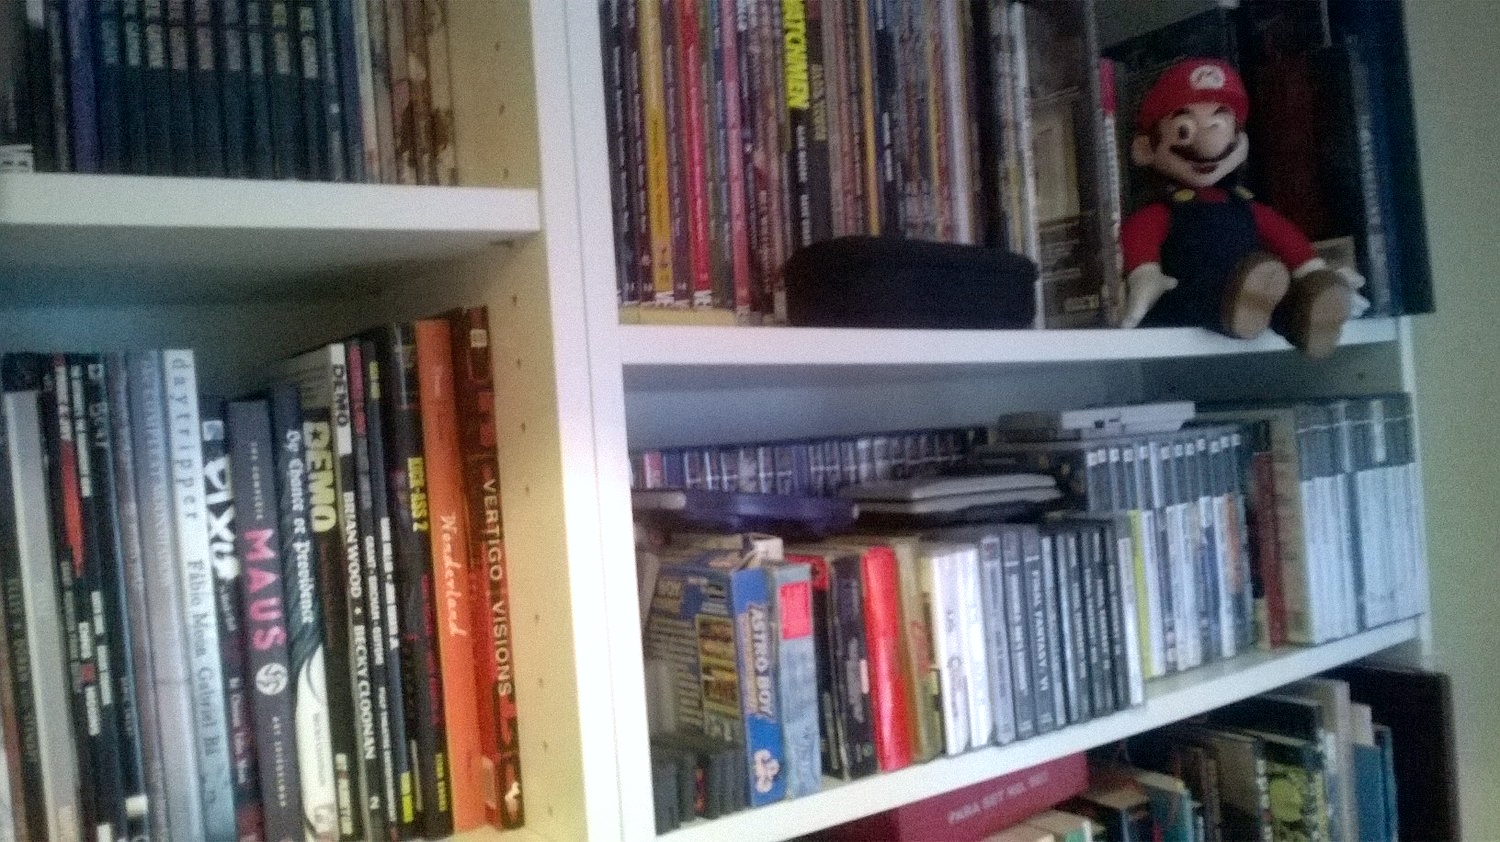 Some of my graphic novel and gaming collection